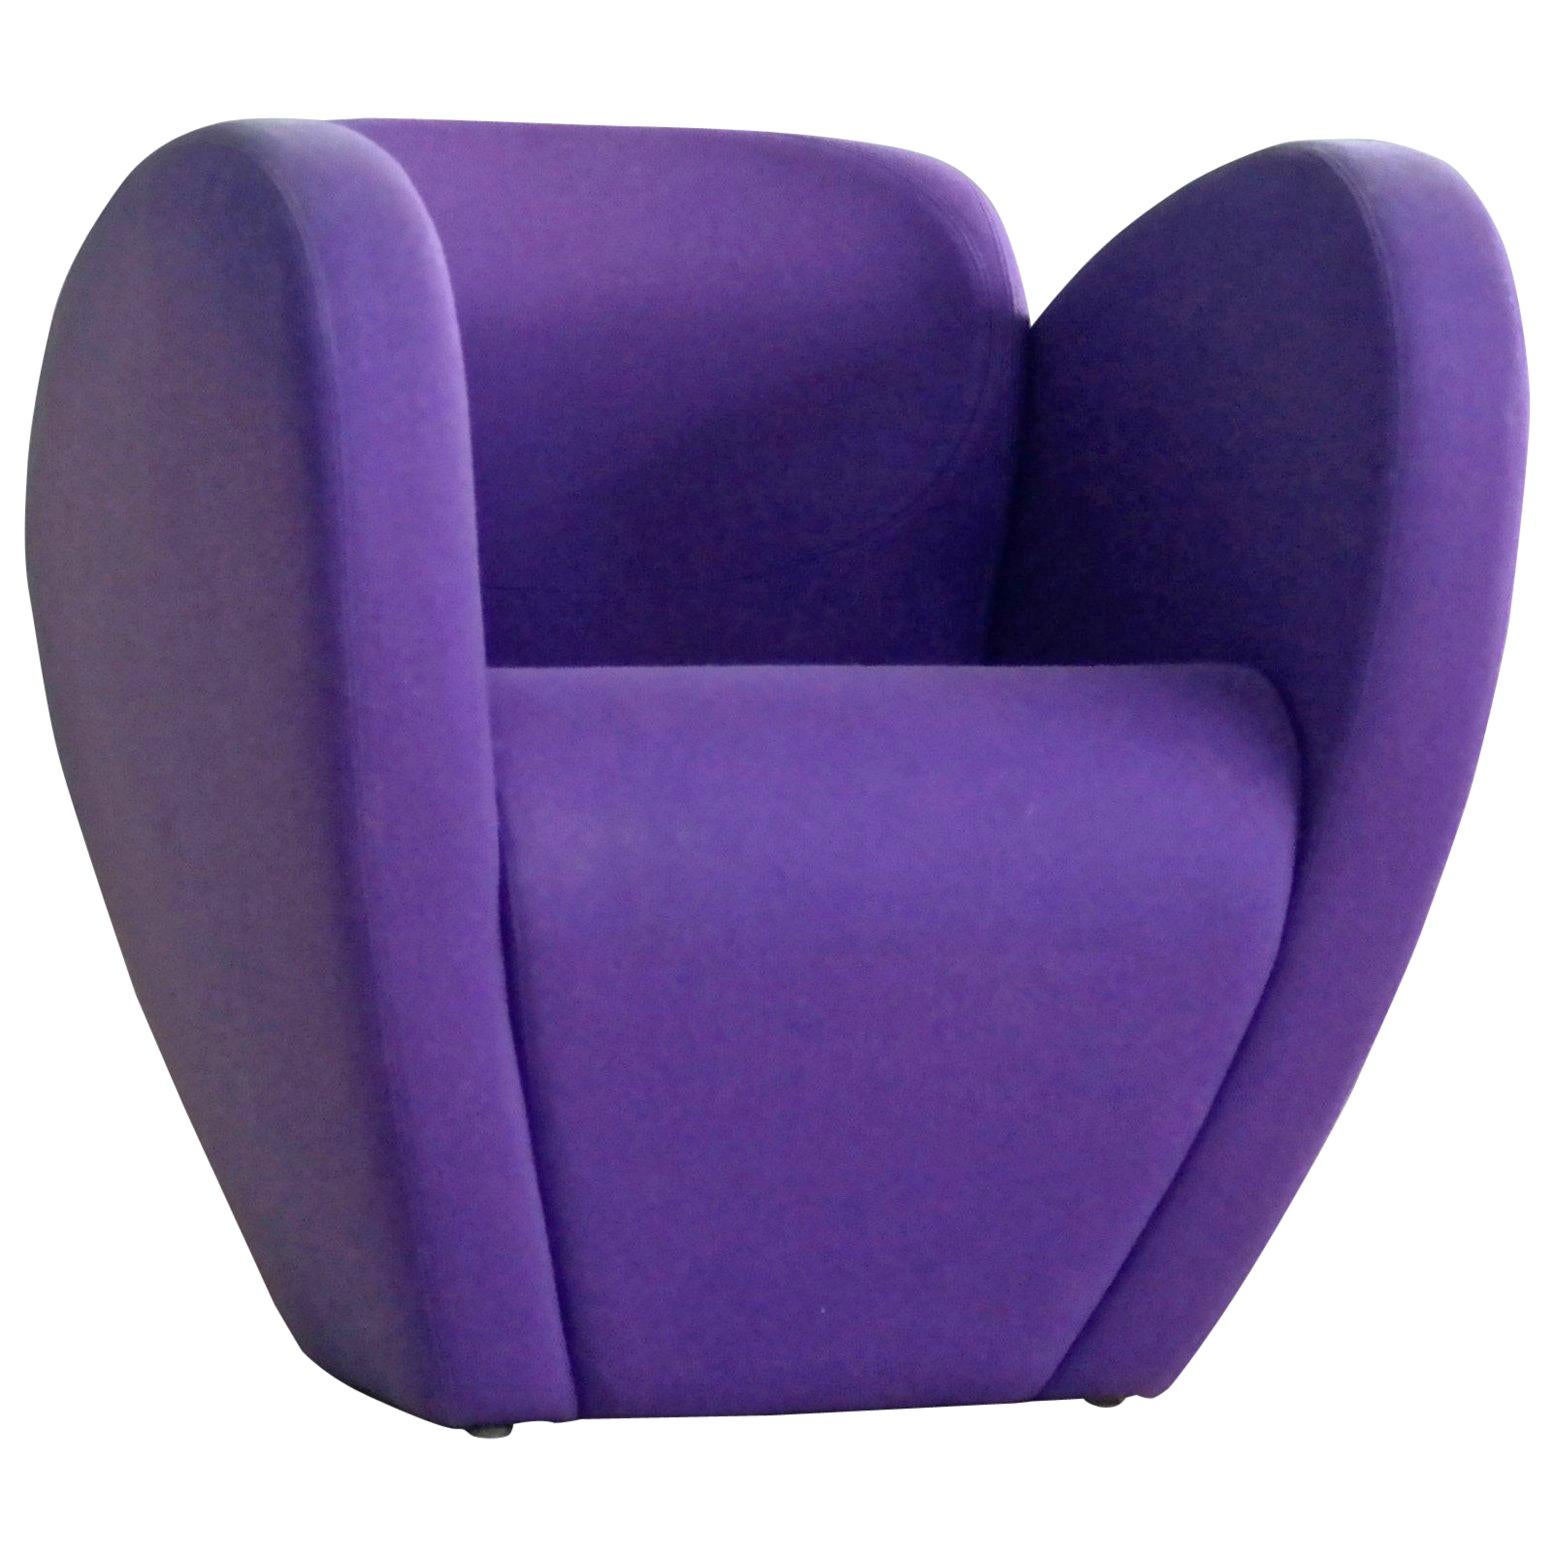 Ron Arad Lounge Chair Model in Purple Wool for Moroso, Italy